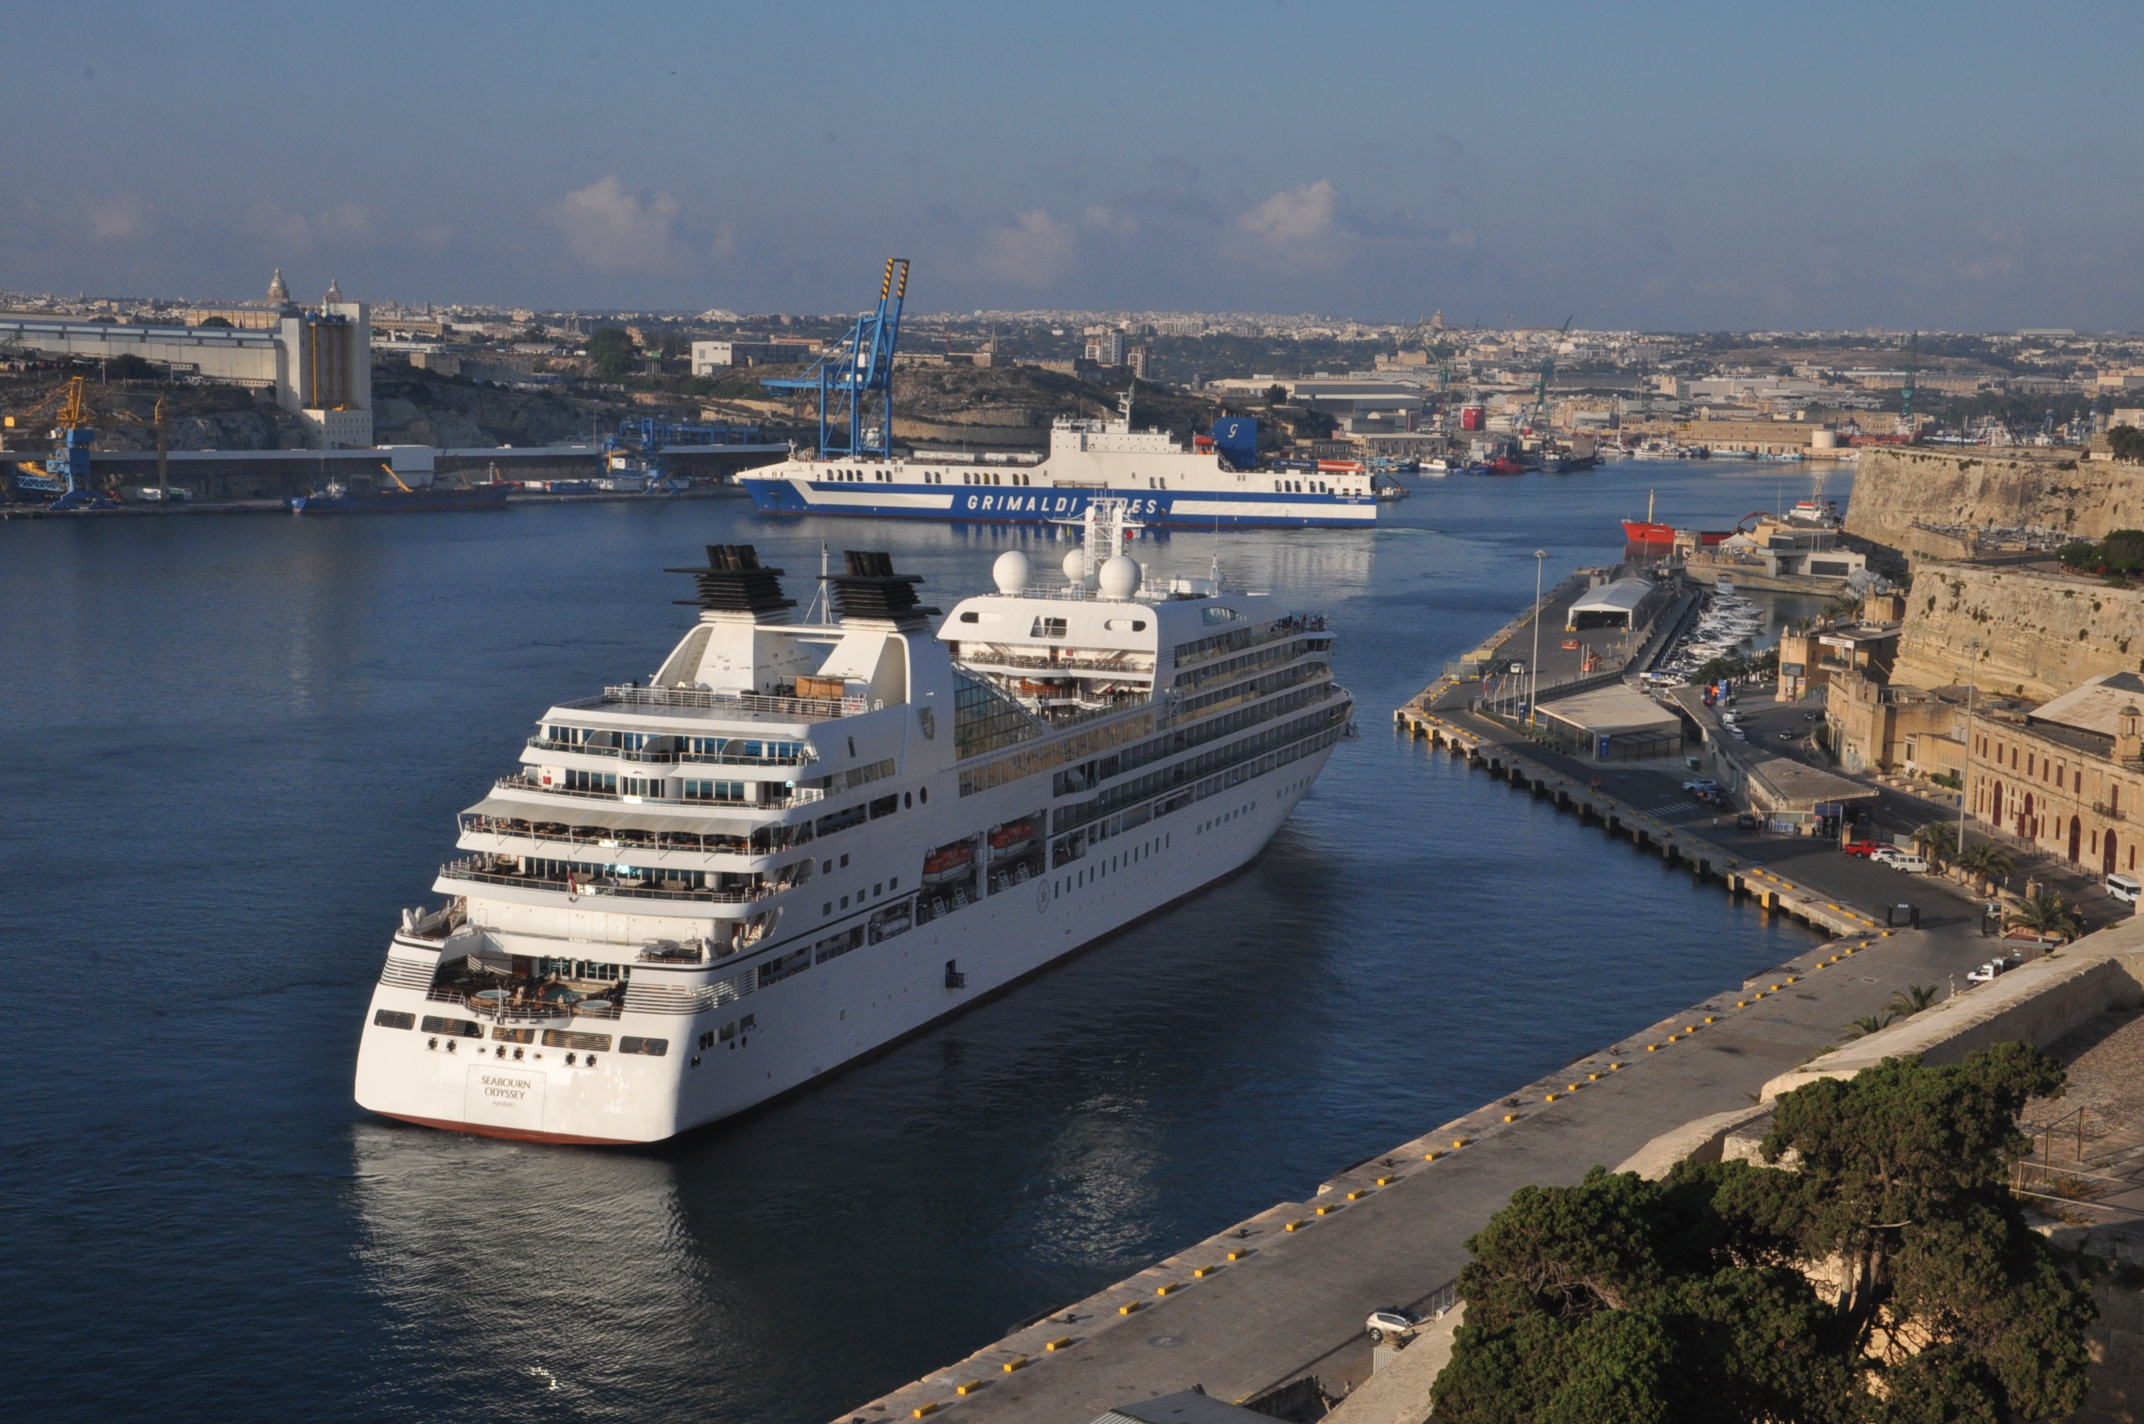 cruise liners leaving malta today